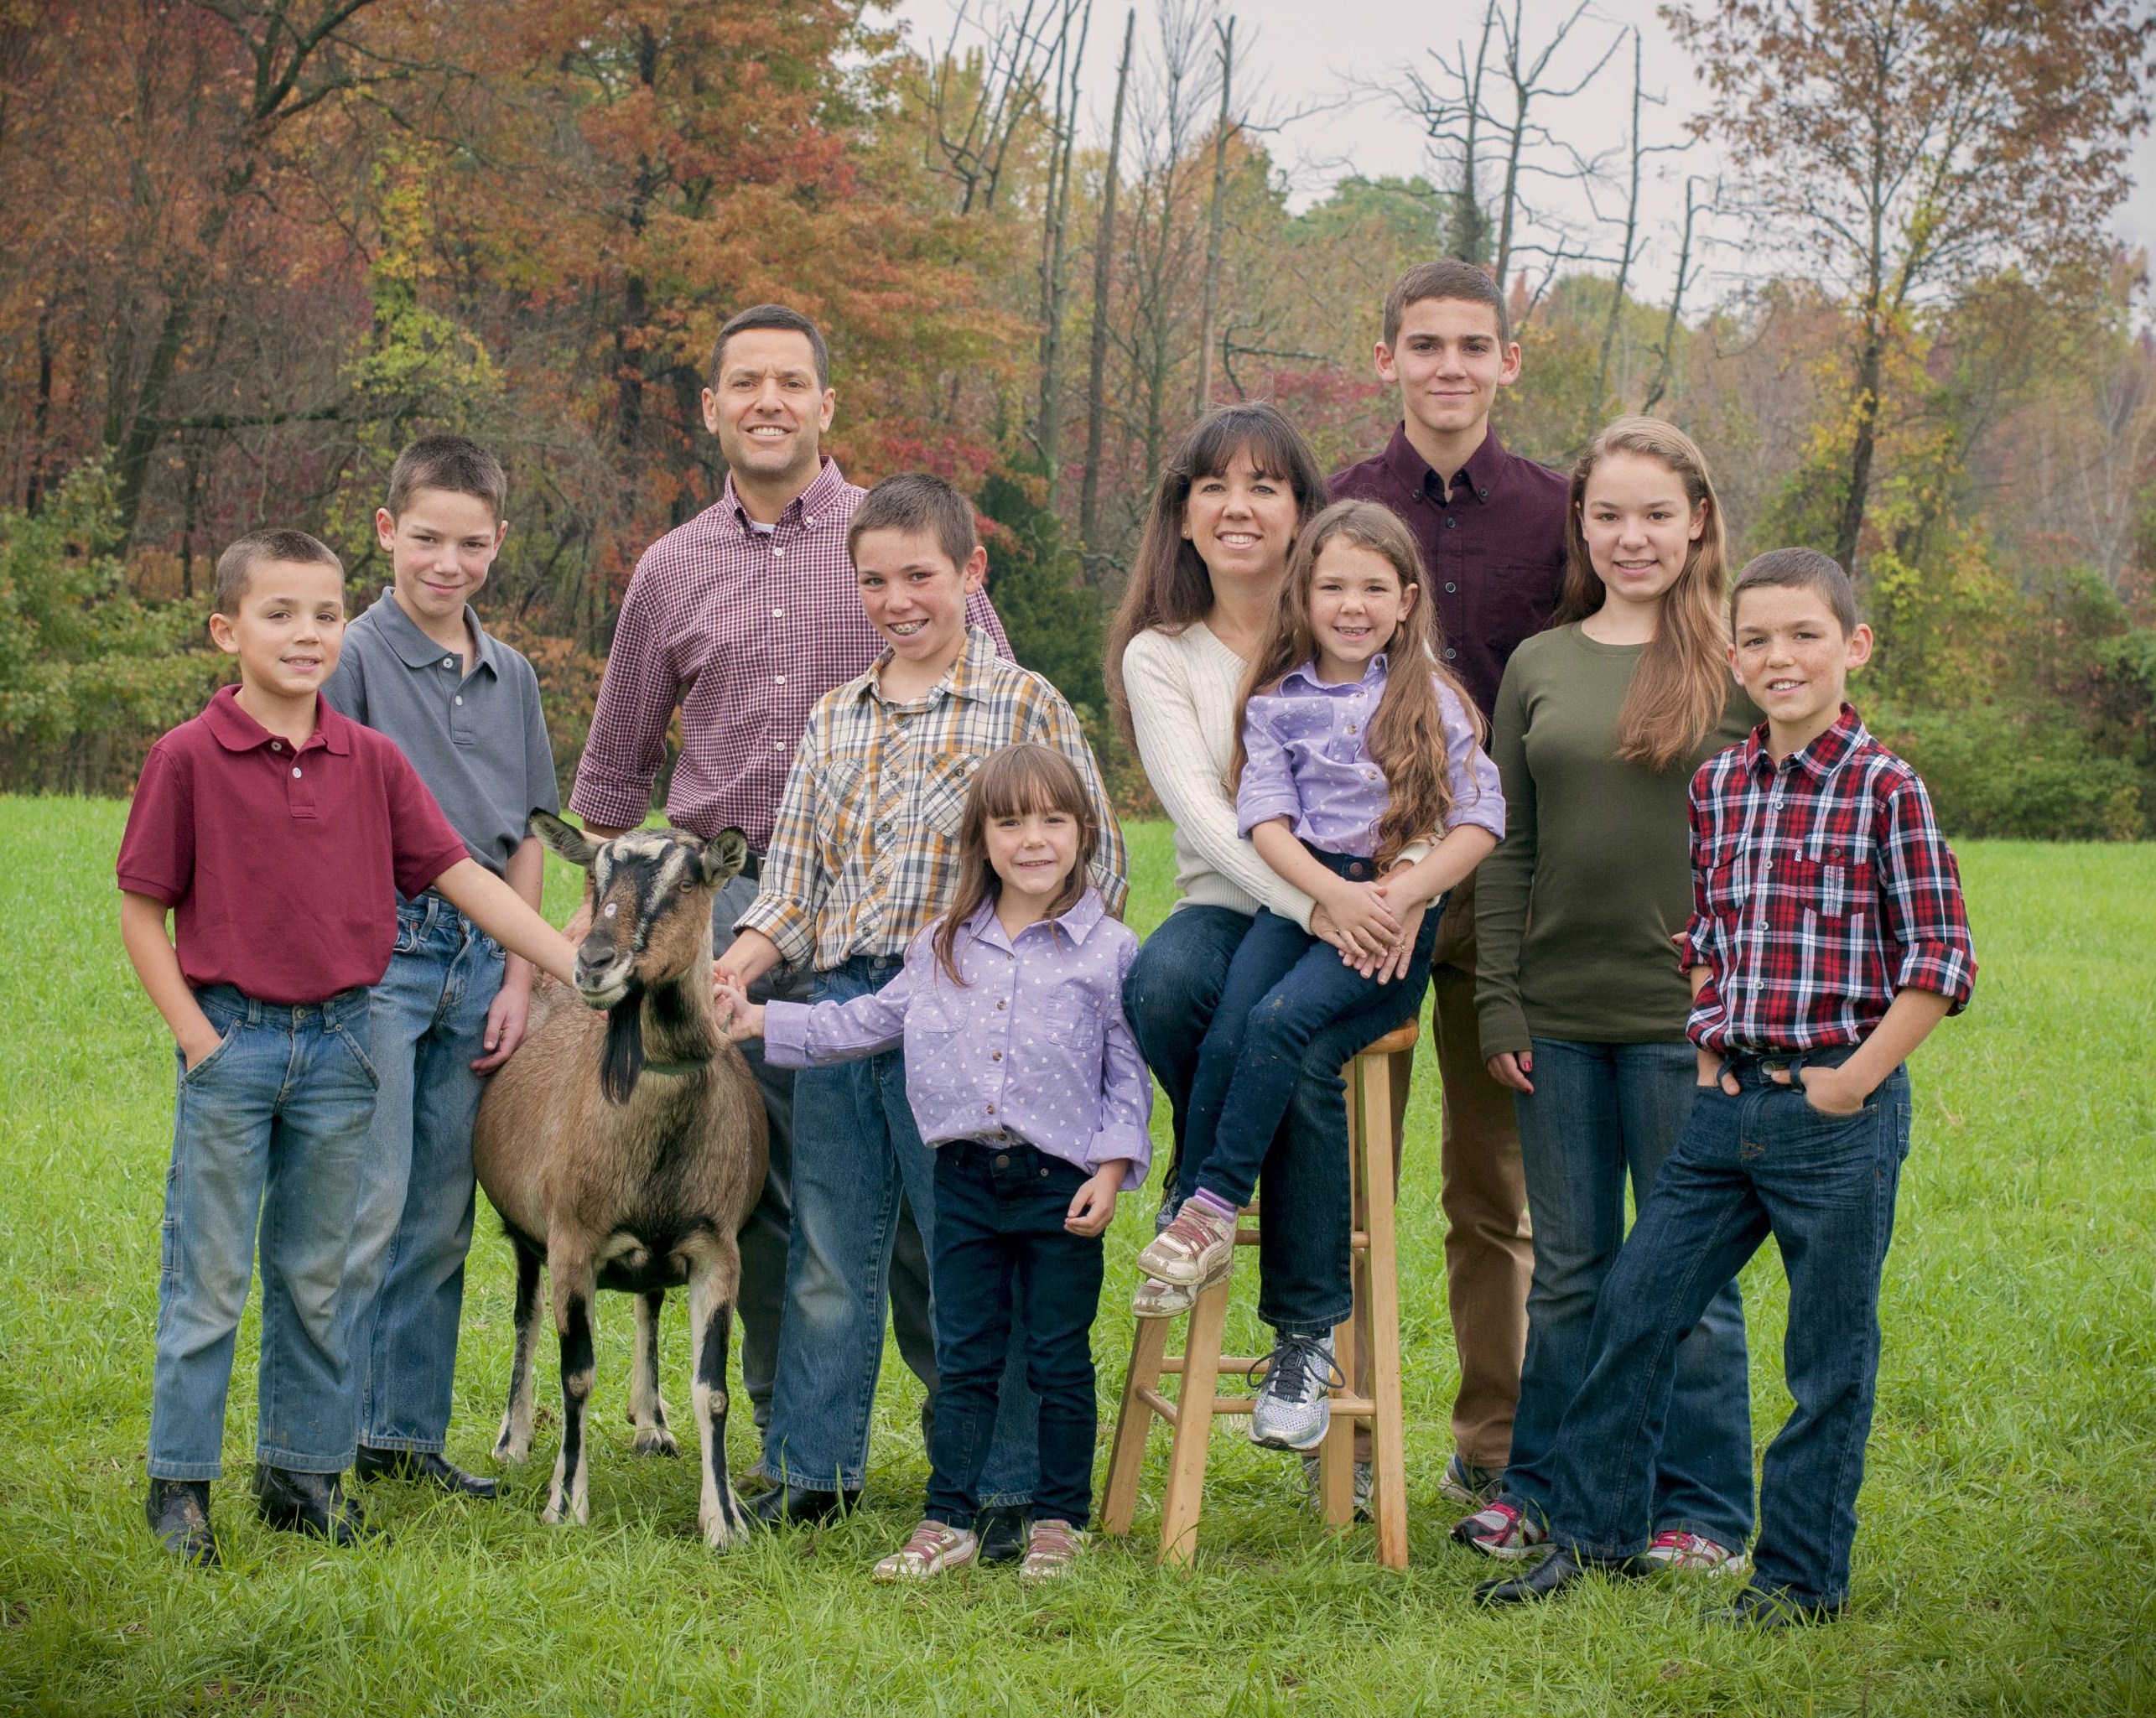 PJ and Jim Jonas of Goat Milk Stuff involve their 8 children in age-appropriate ways in the family business.